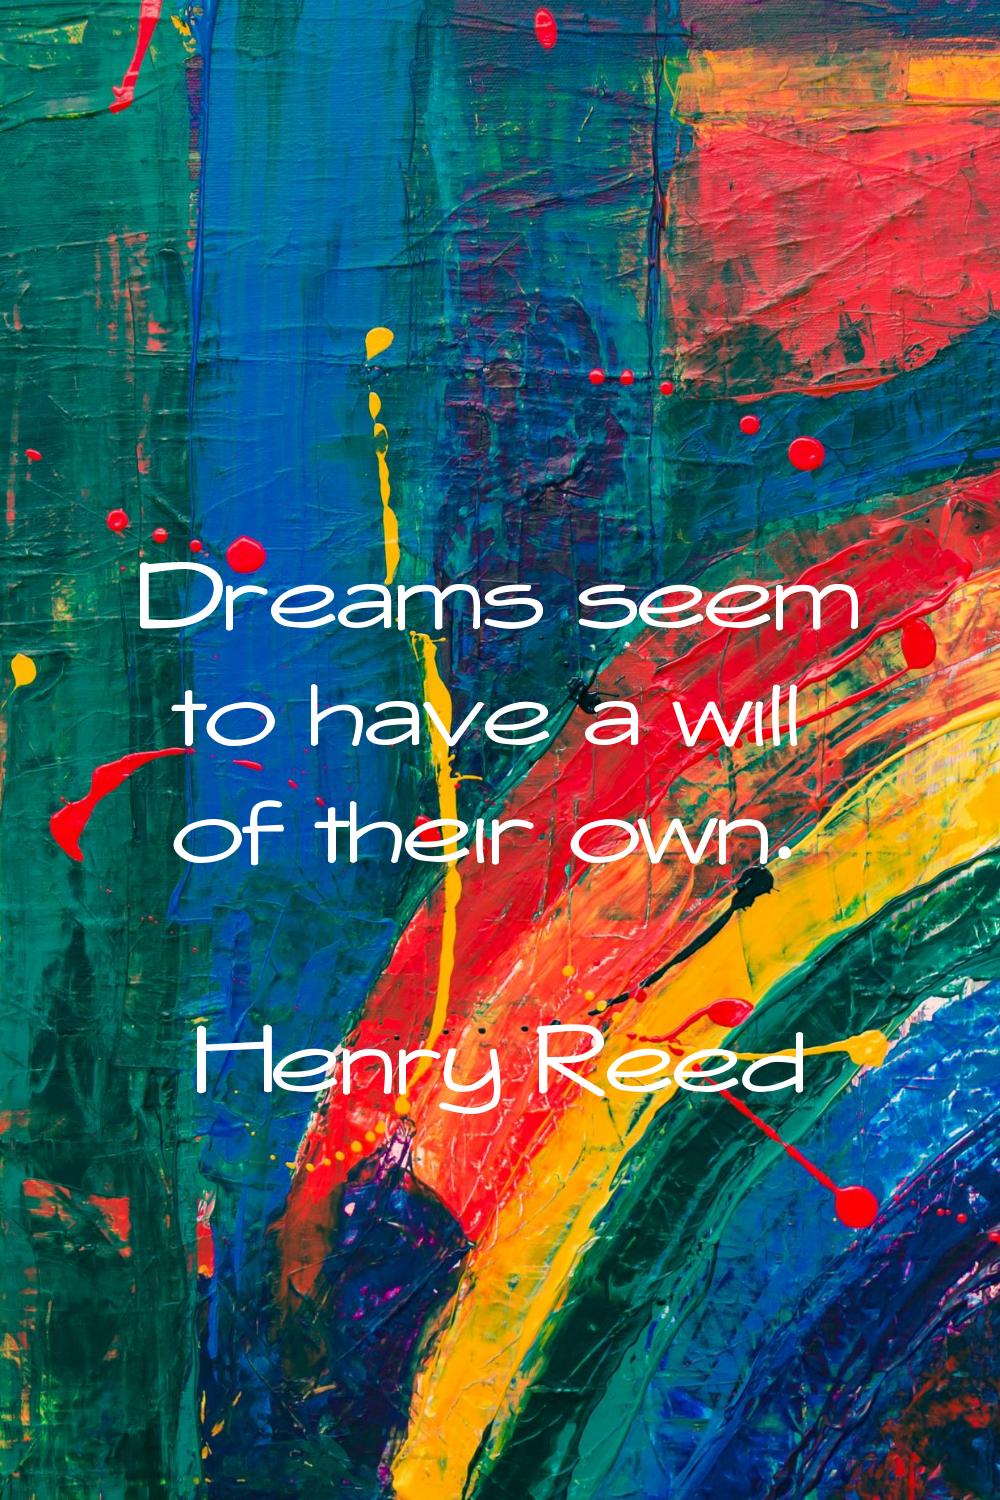 Dreams seem to have a will of their own.